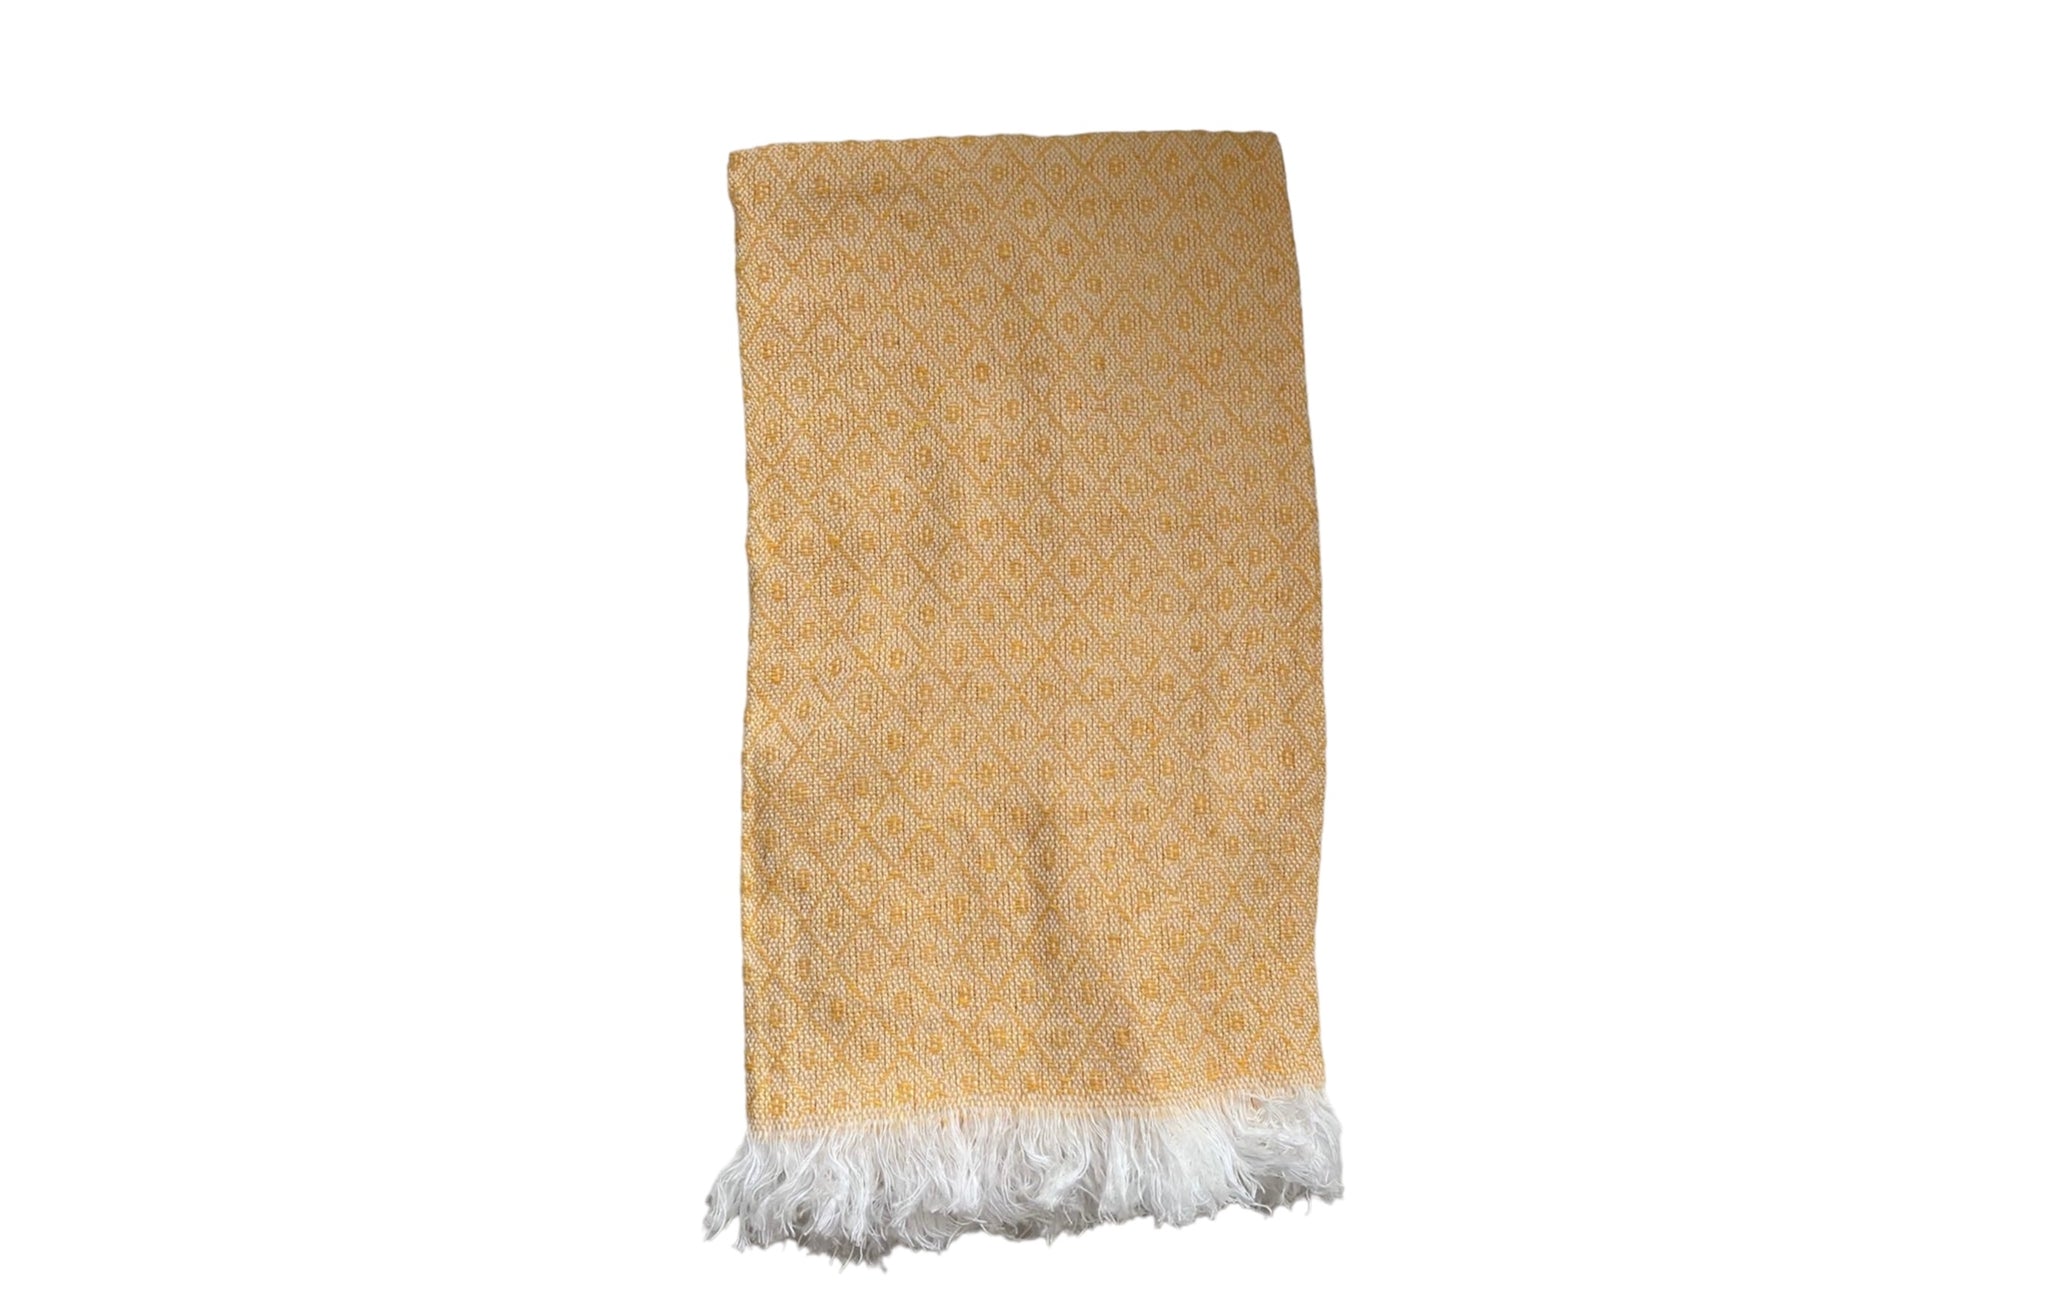 Large Mexican Towel 28 x 24 in| Turkish Towel